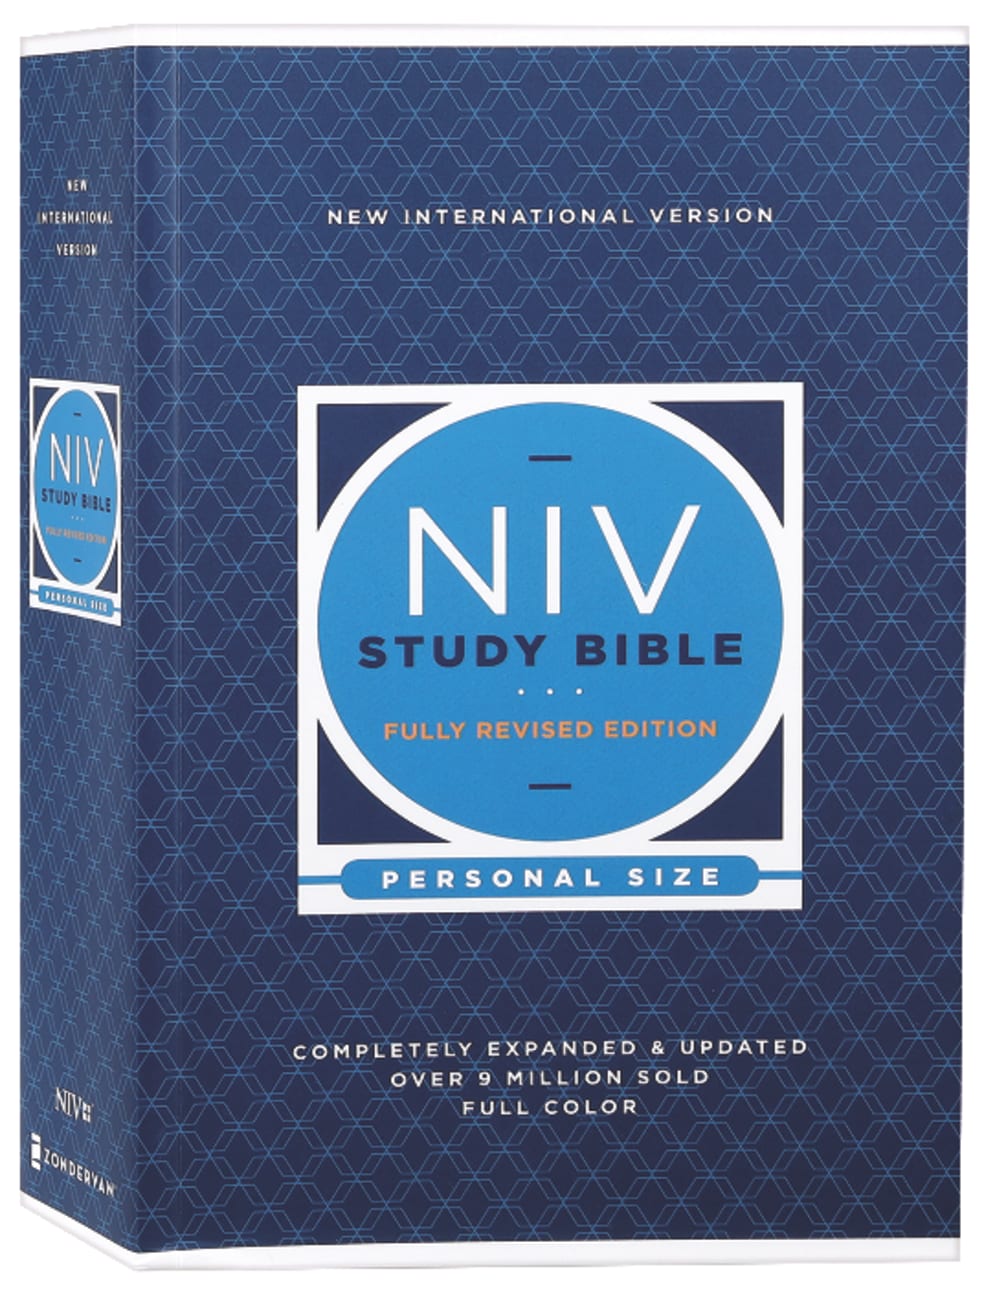 NIV Study Bible Personal Size (Red Letter Edition) Fully Revised Edition (2020) Paperback